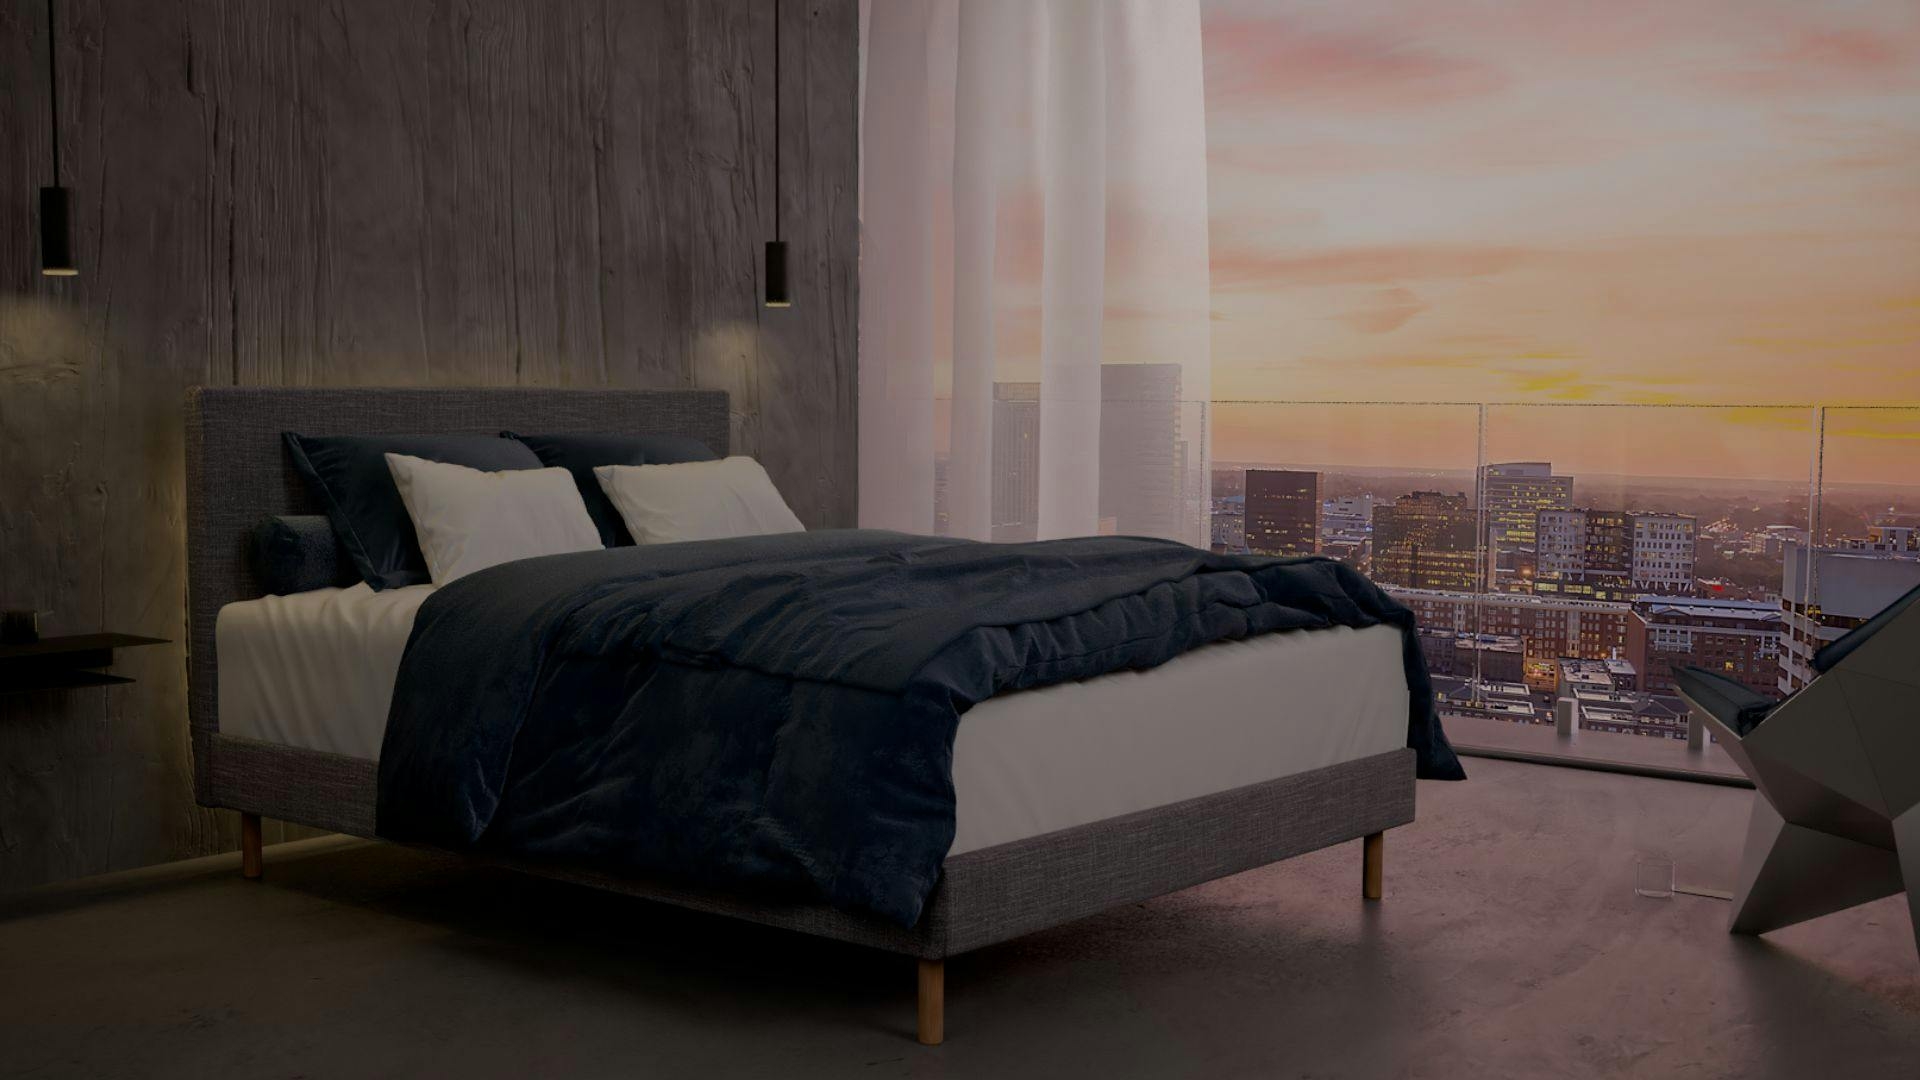 The Boyd SD Indestruct Bed in Charcoal, in an industrial bedroom overlooking a morning city skyline.